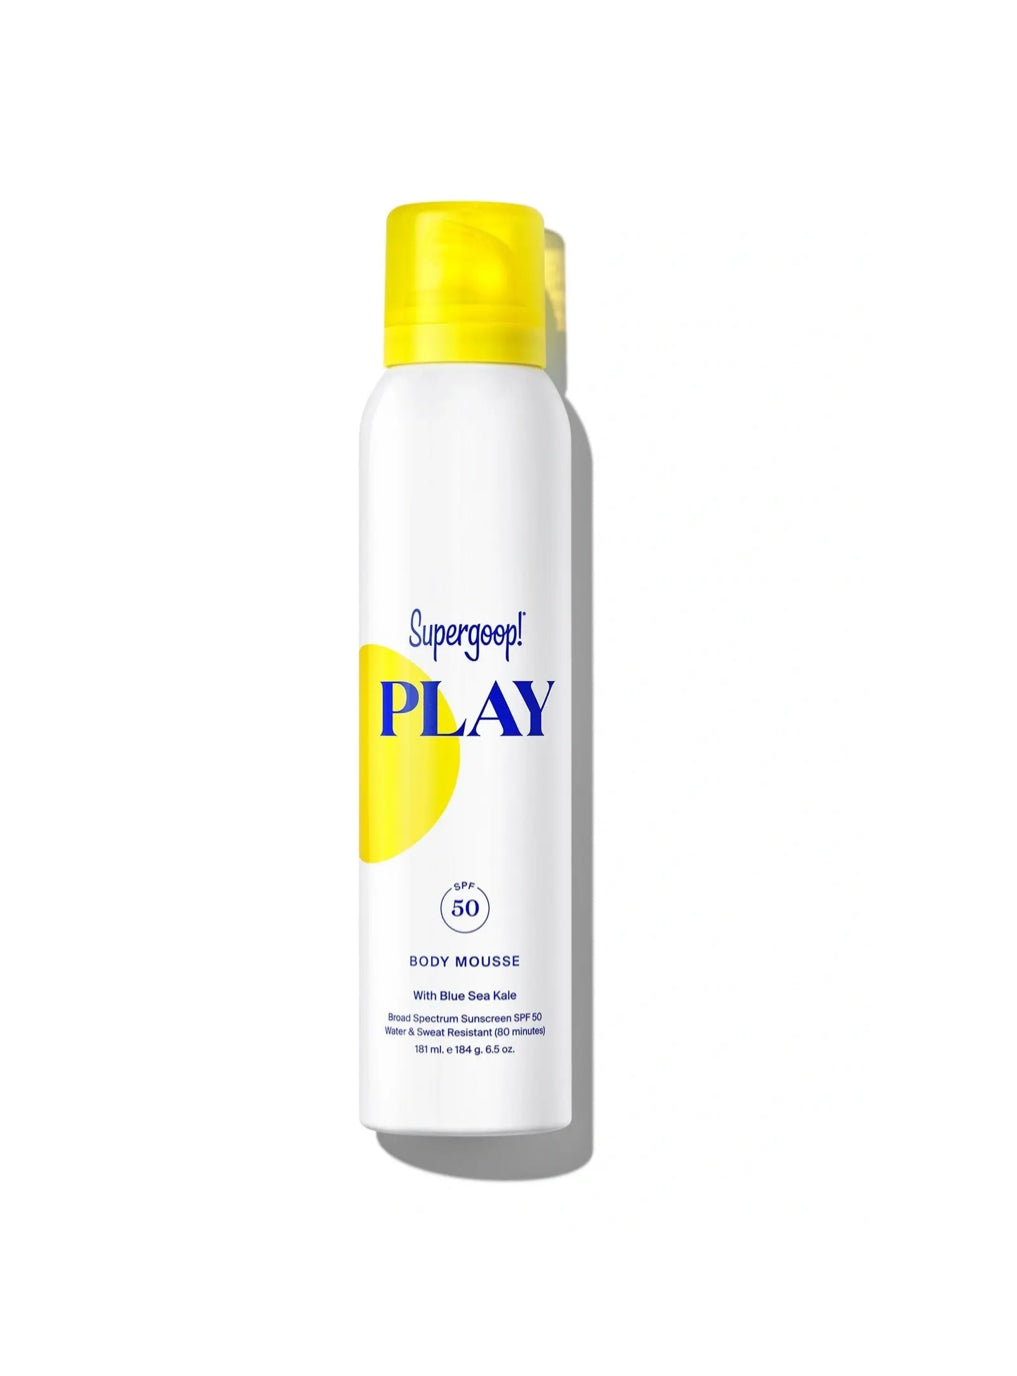 Supergoop Play Body Mousse SPF 50